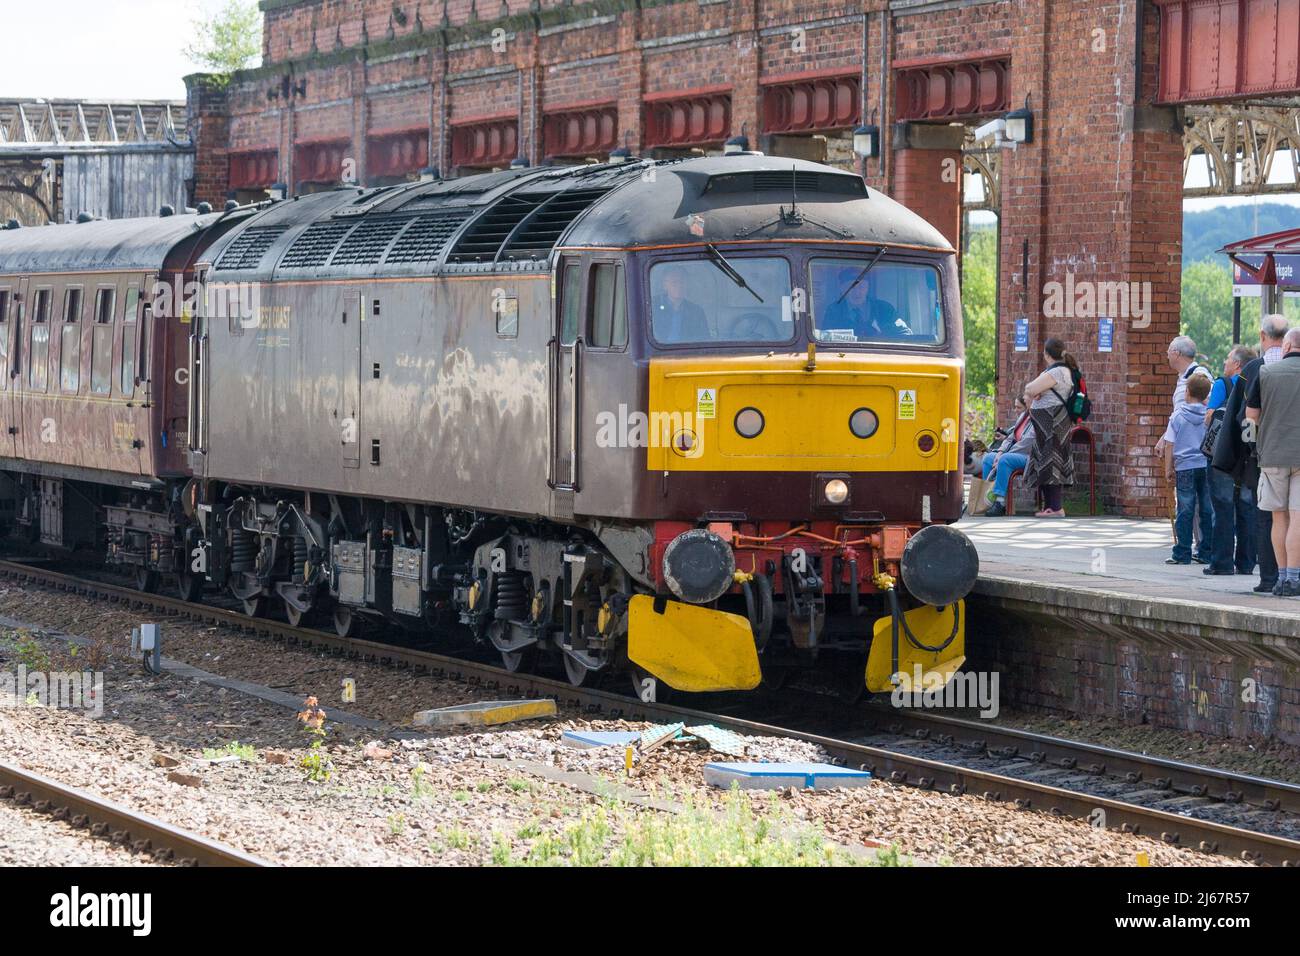 A diesel passenger train at Wakefield Stock Photo